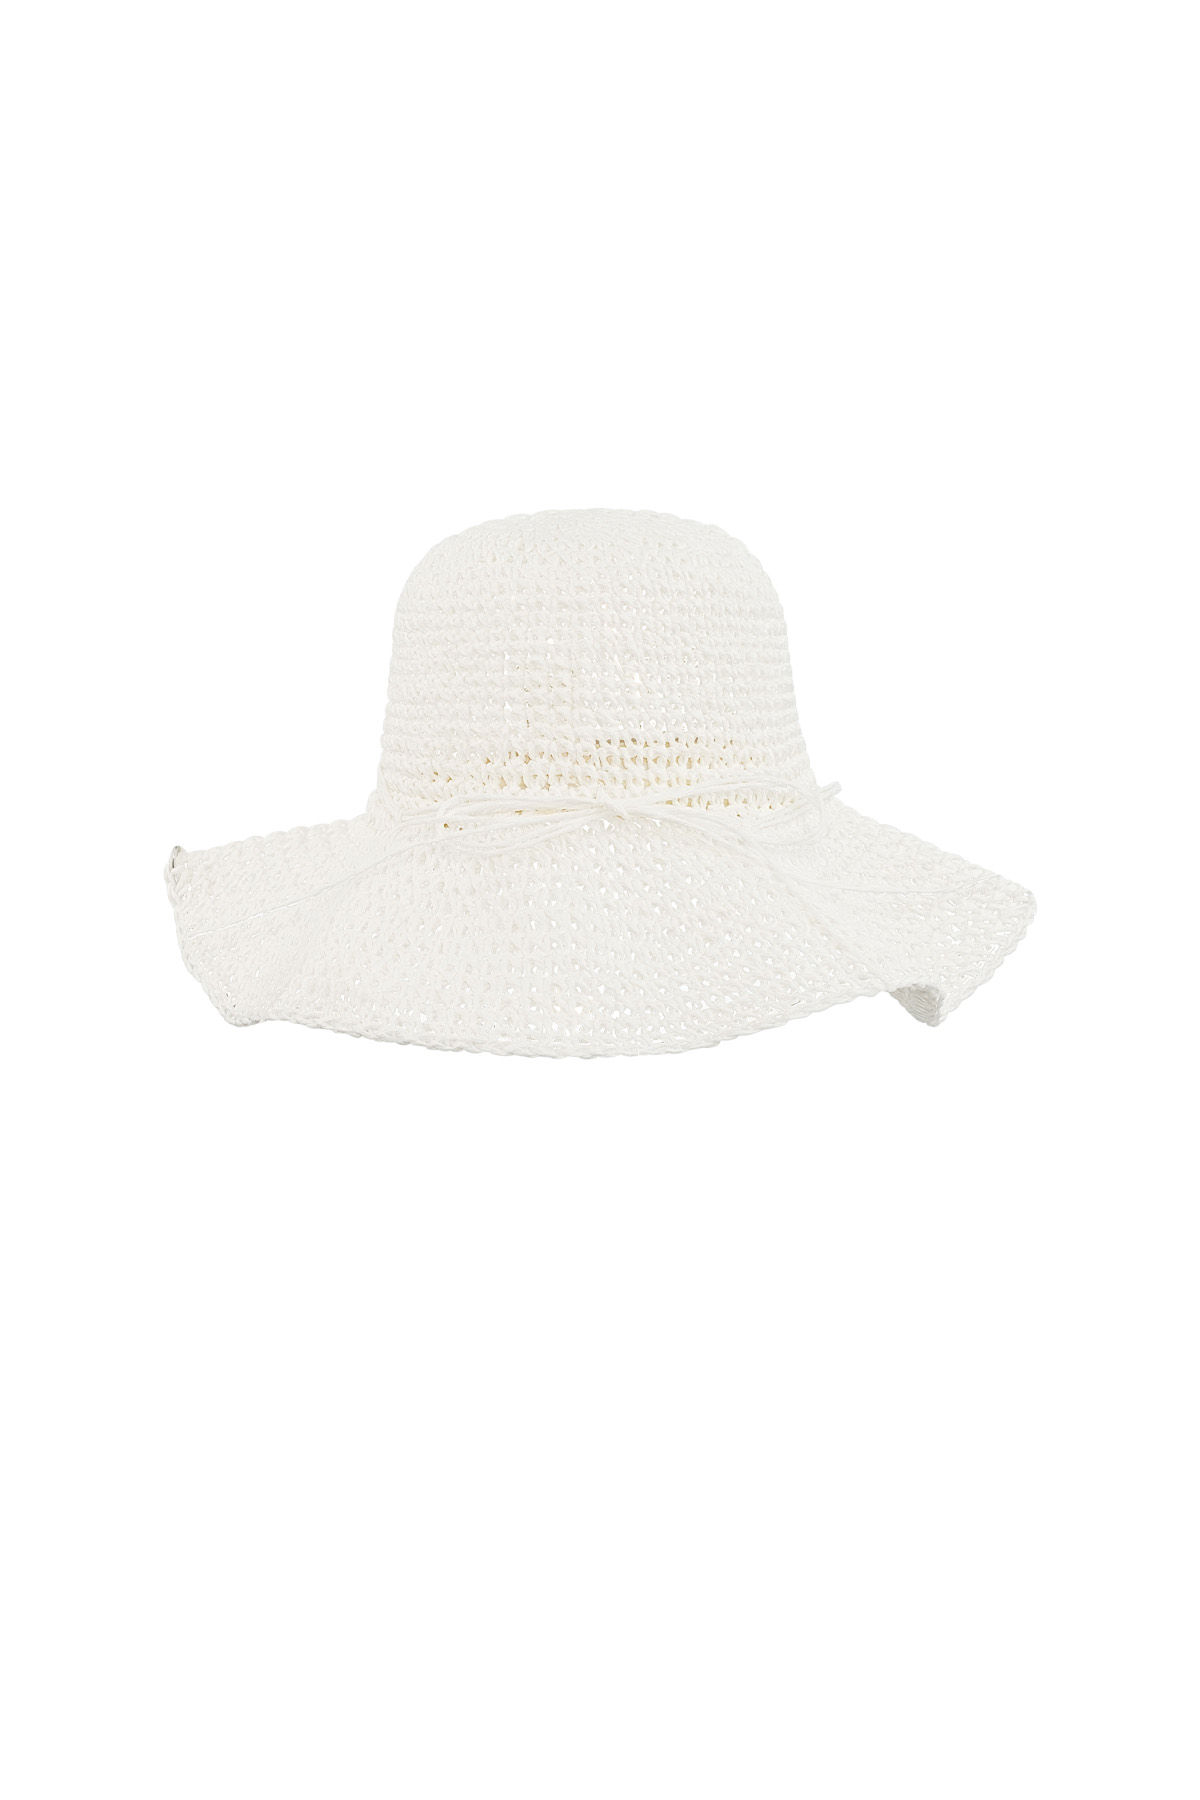 Crochet hat with bow - white h5 